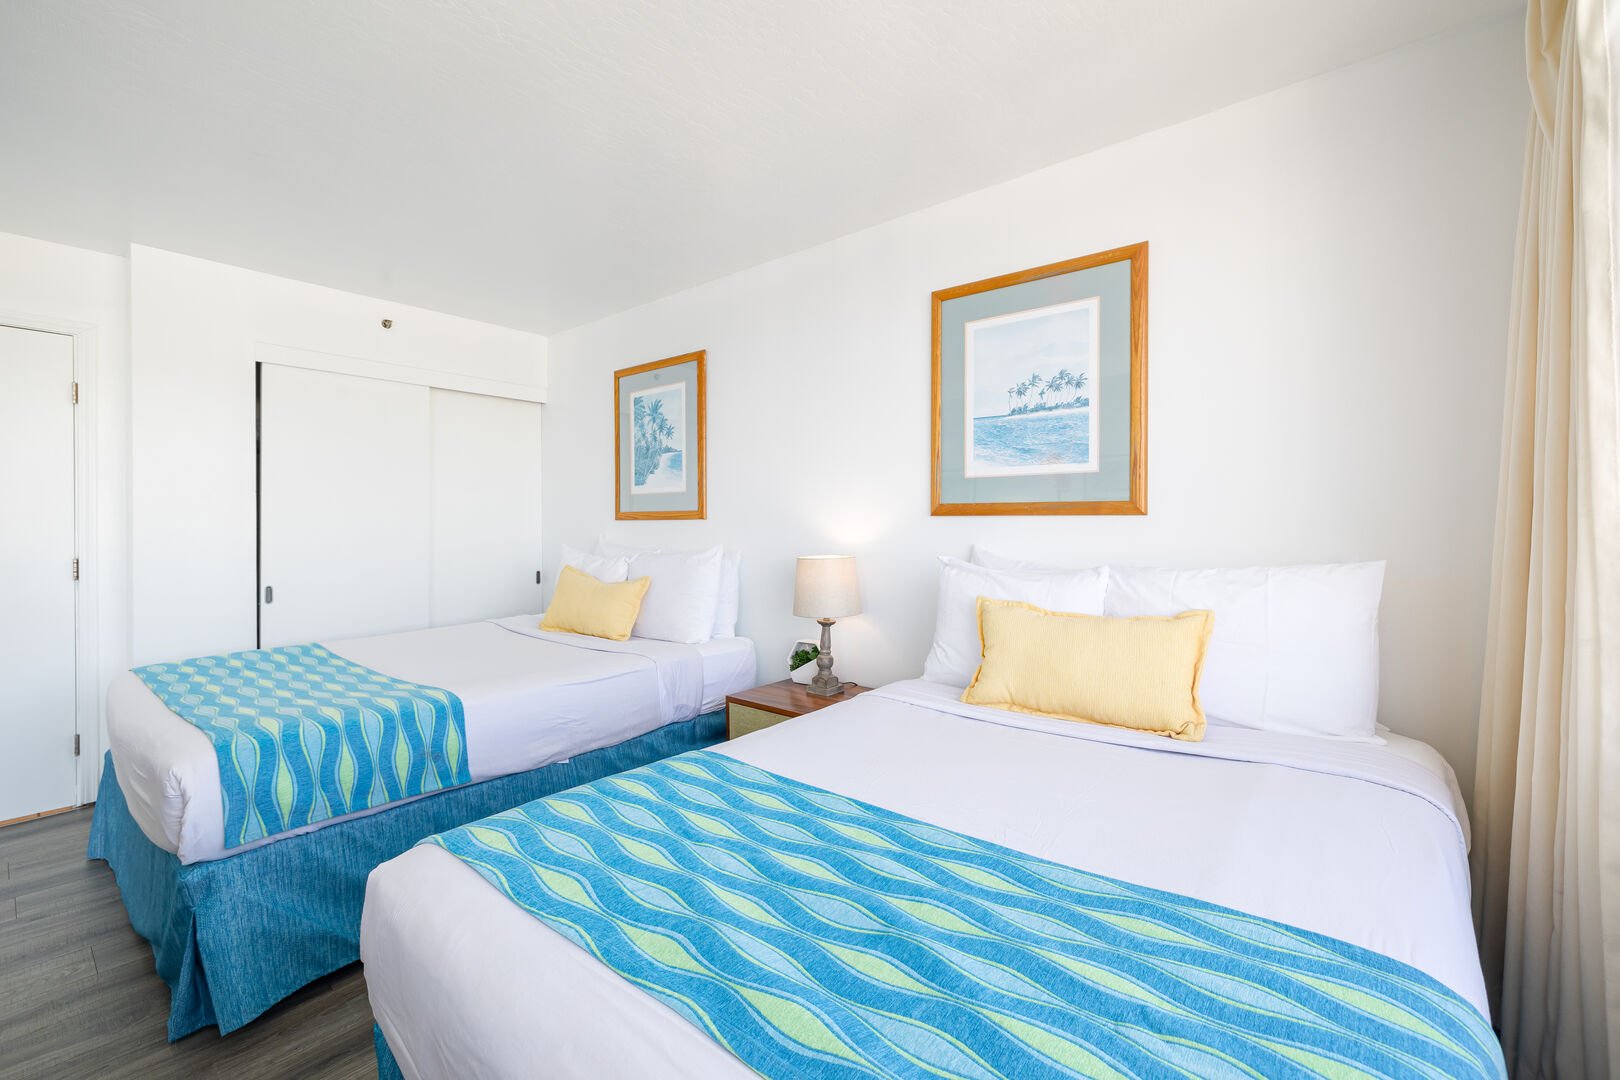 The bedroom features queen-size and full-size beds, nightstand, and closet!